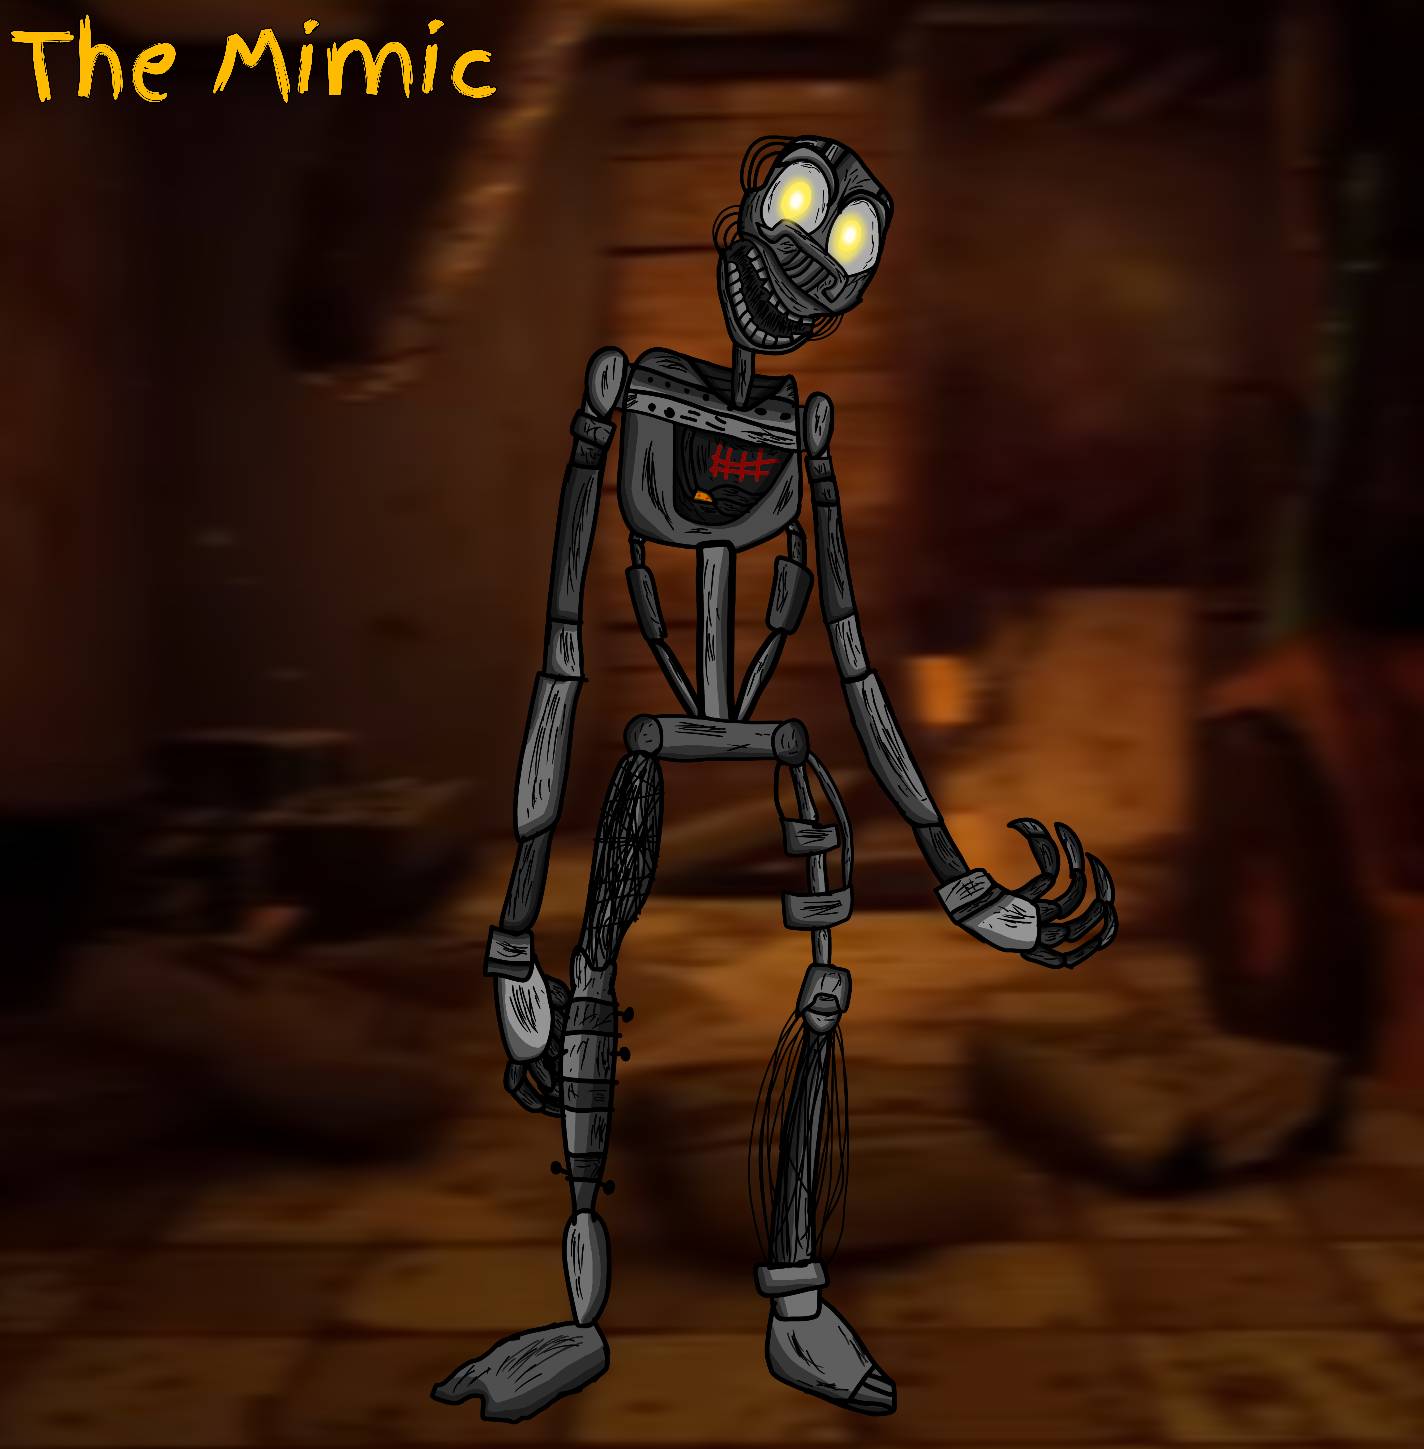 The Mimic by Jam3sTop on Newgrounds